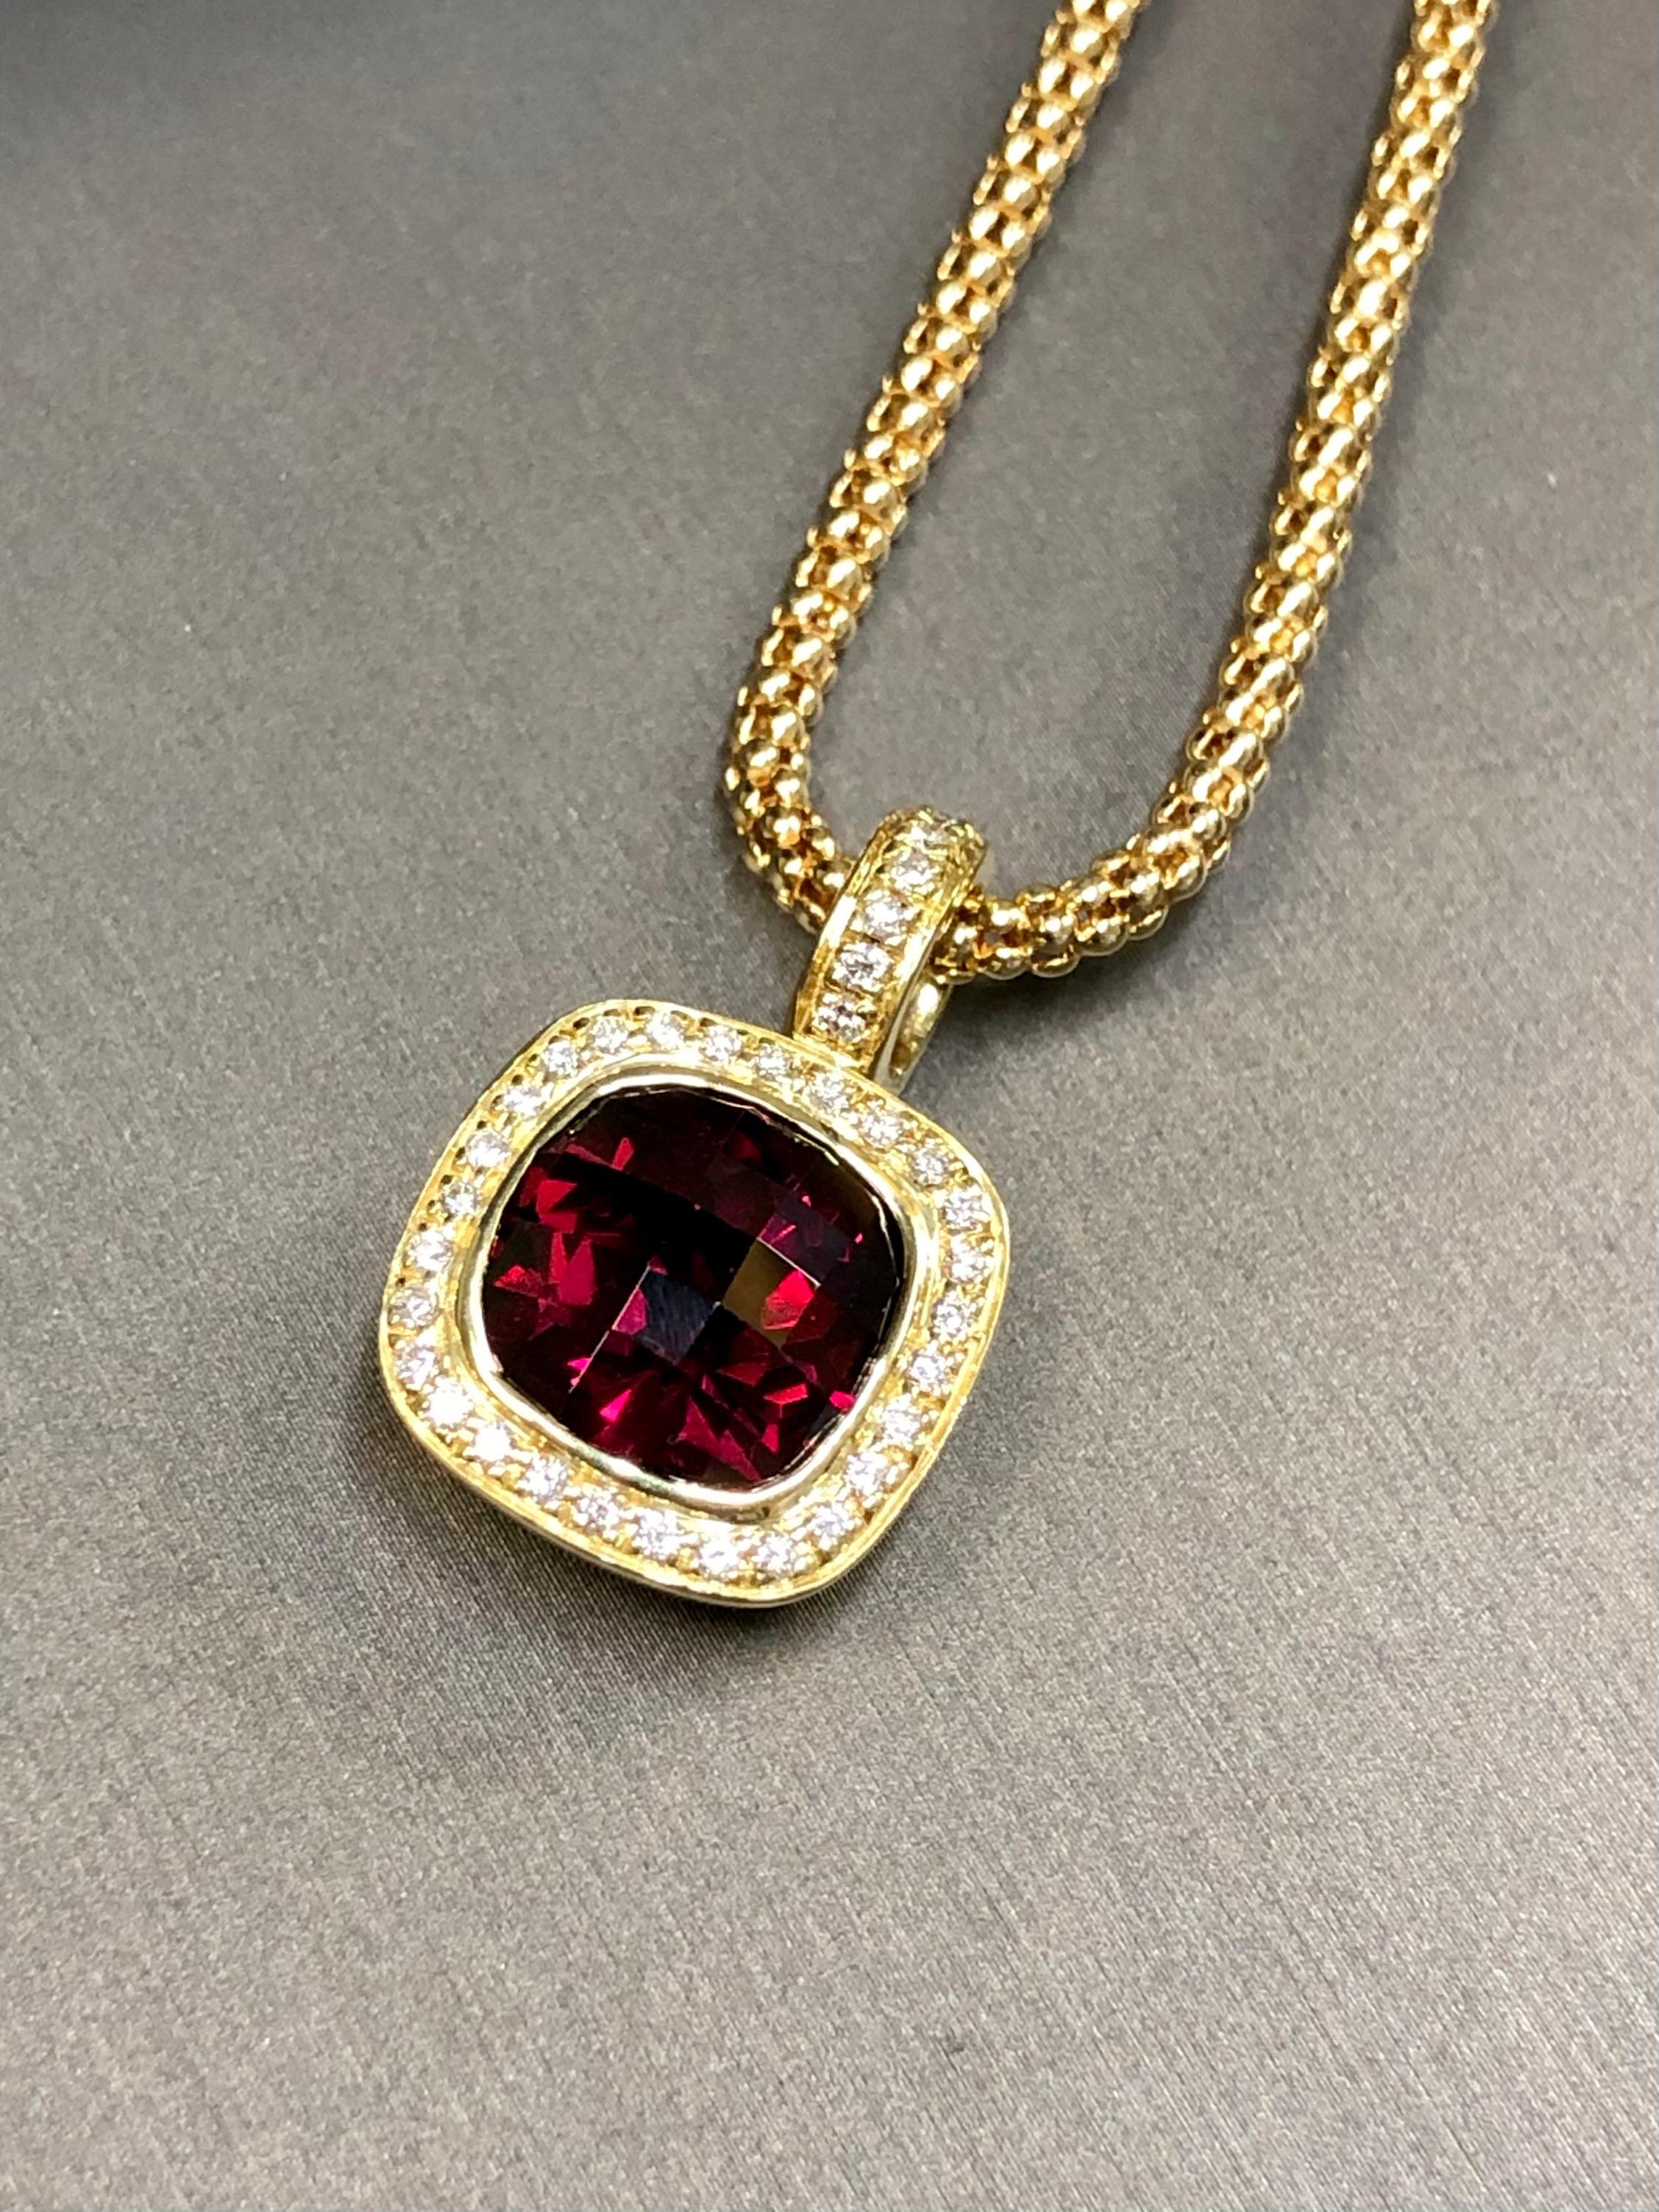 
A gorgeous necklace done in 18K yellow gold by American fine jewelry manufacturer, “Spark”. Known for their colored stone pieces, Spark uses only the best materials with superior build quality and this piece is no exception. It is centered with an